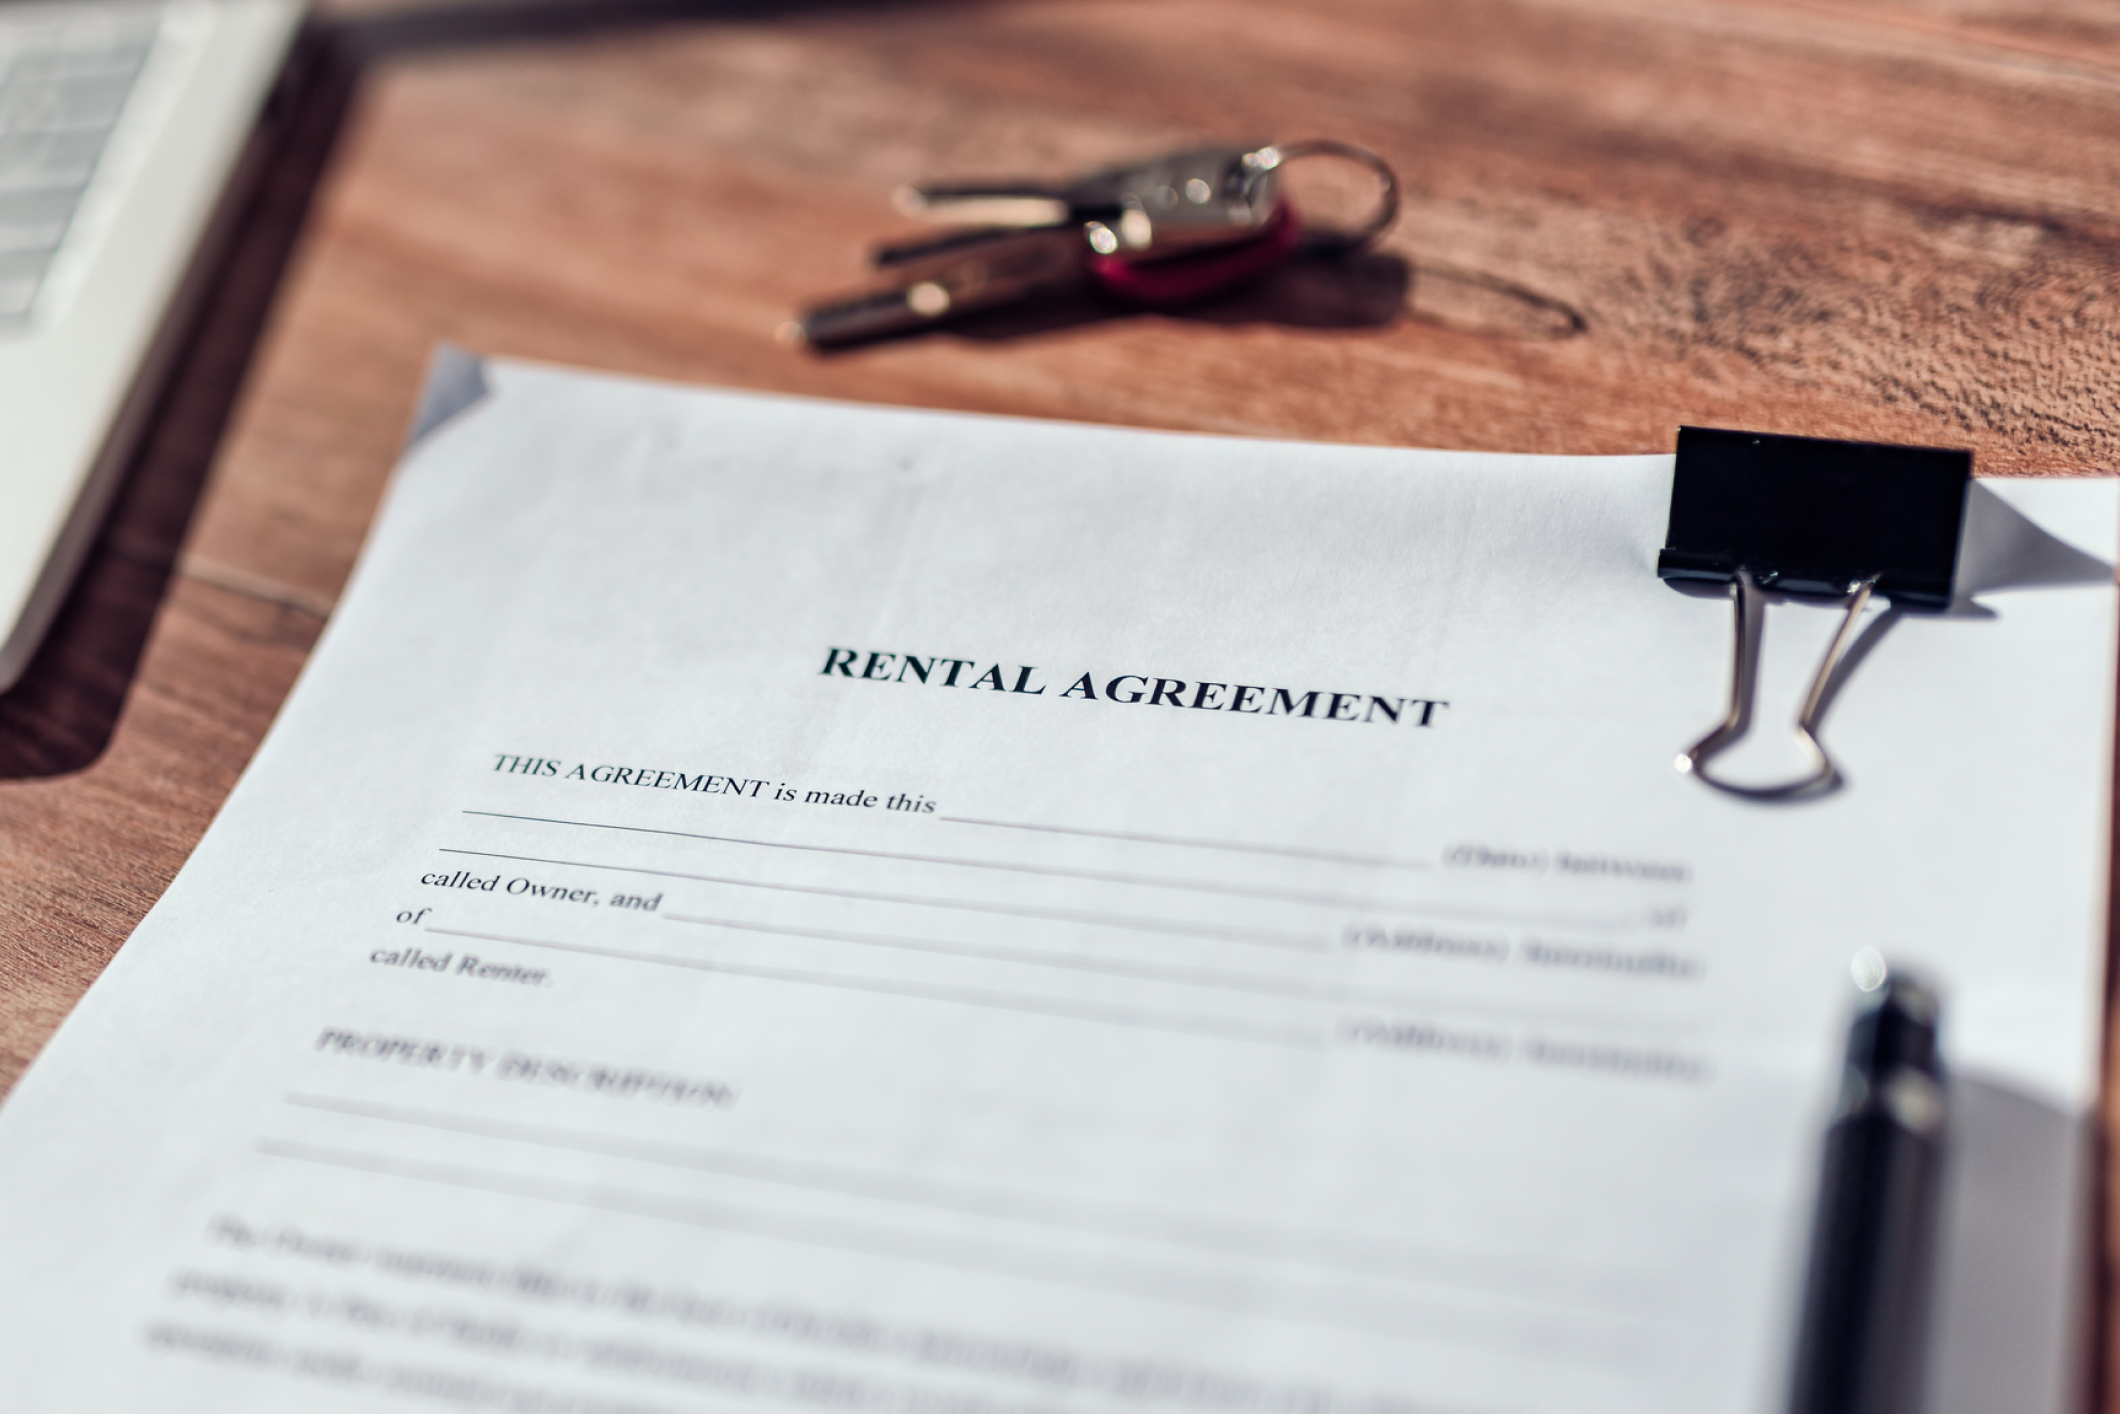 Rental Agreement laying on a desk next to keys